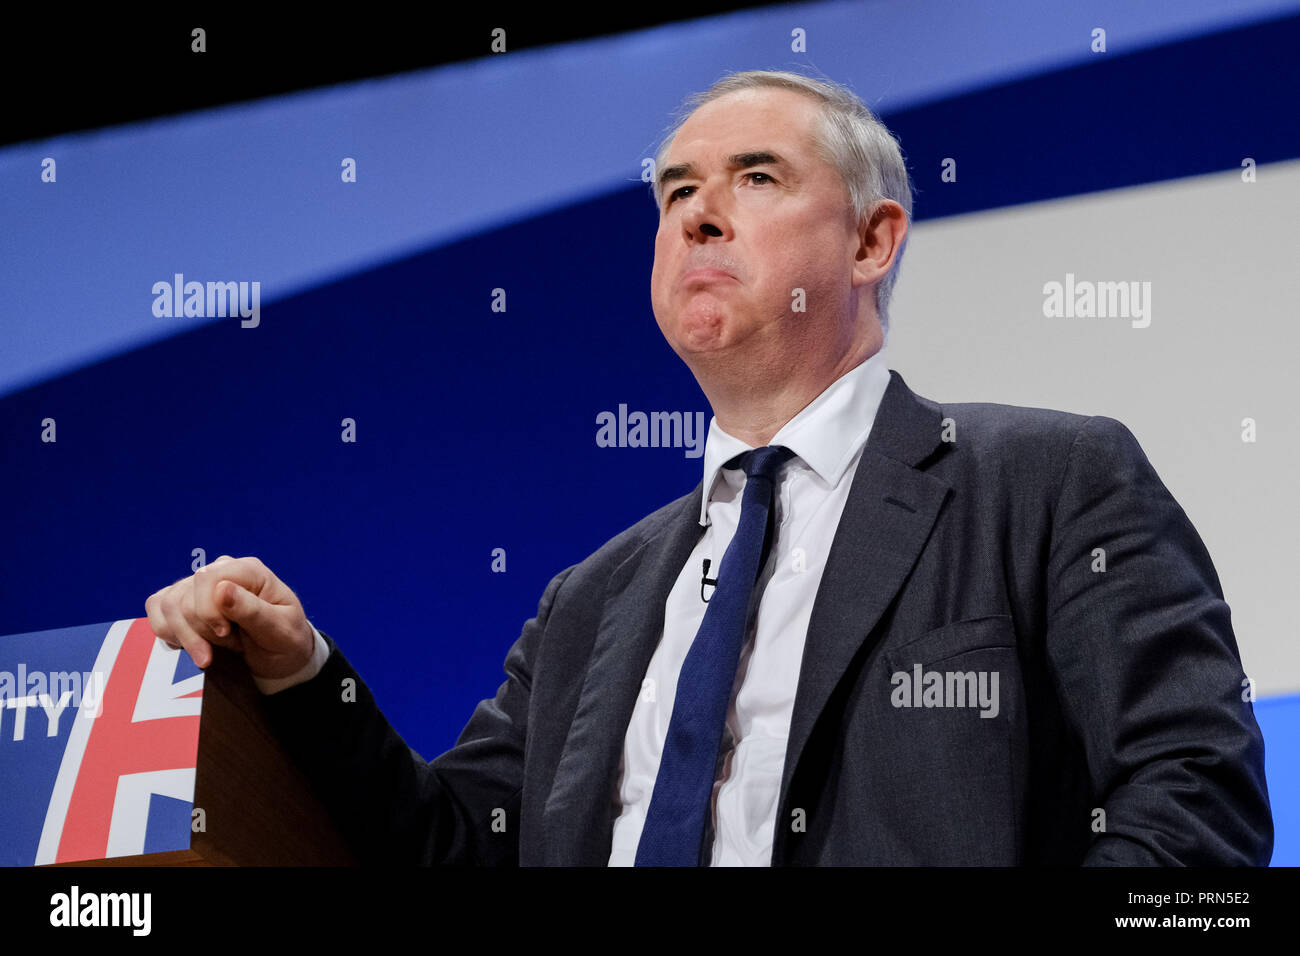 Geoffrey Cox at the Conservative Party Conference on Wednesday 3 October 2018 held at ICC Birmingham , Birmingham . Pictured: Geoffrey Cox, Charles Geoffrey Cox QC. Picture by Julie Edwards. Stock Photo